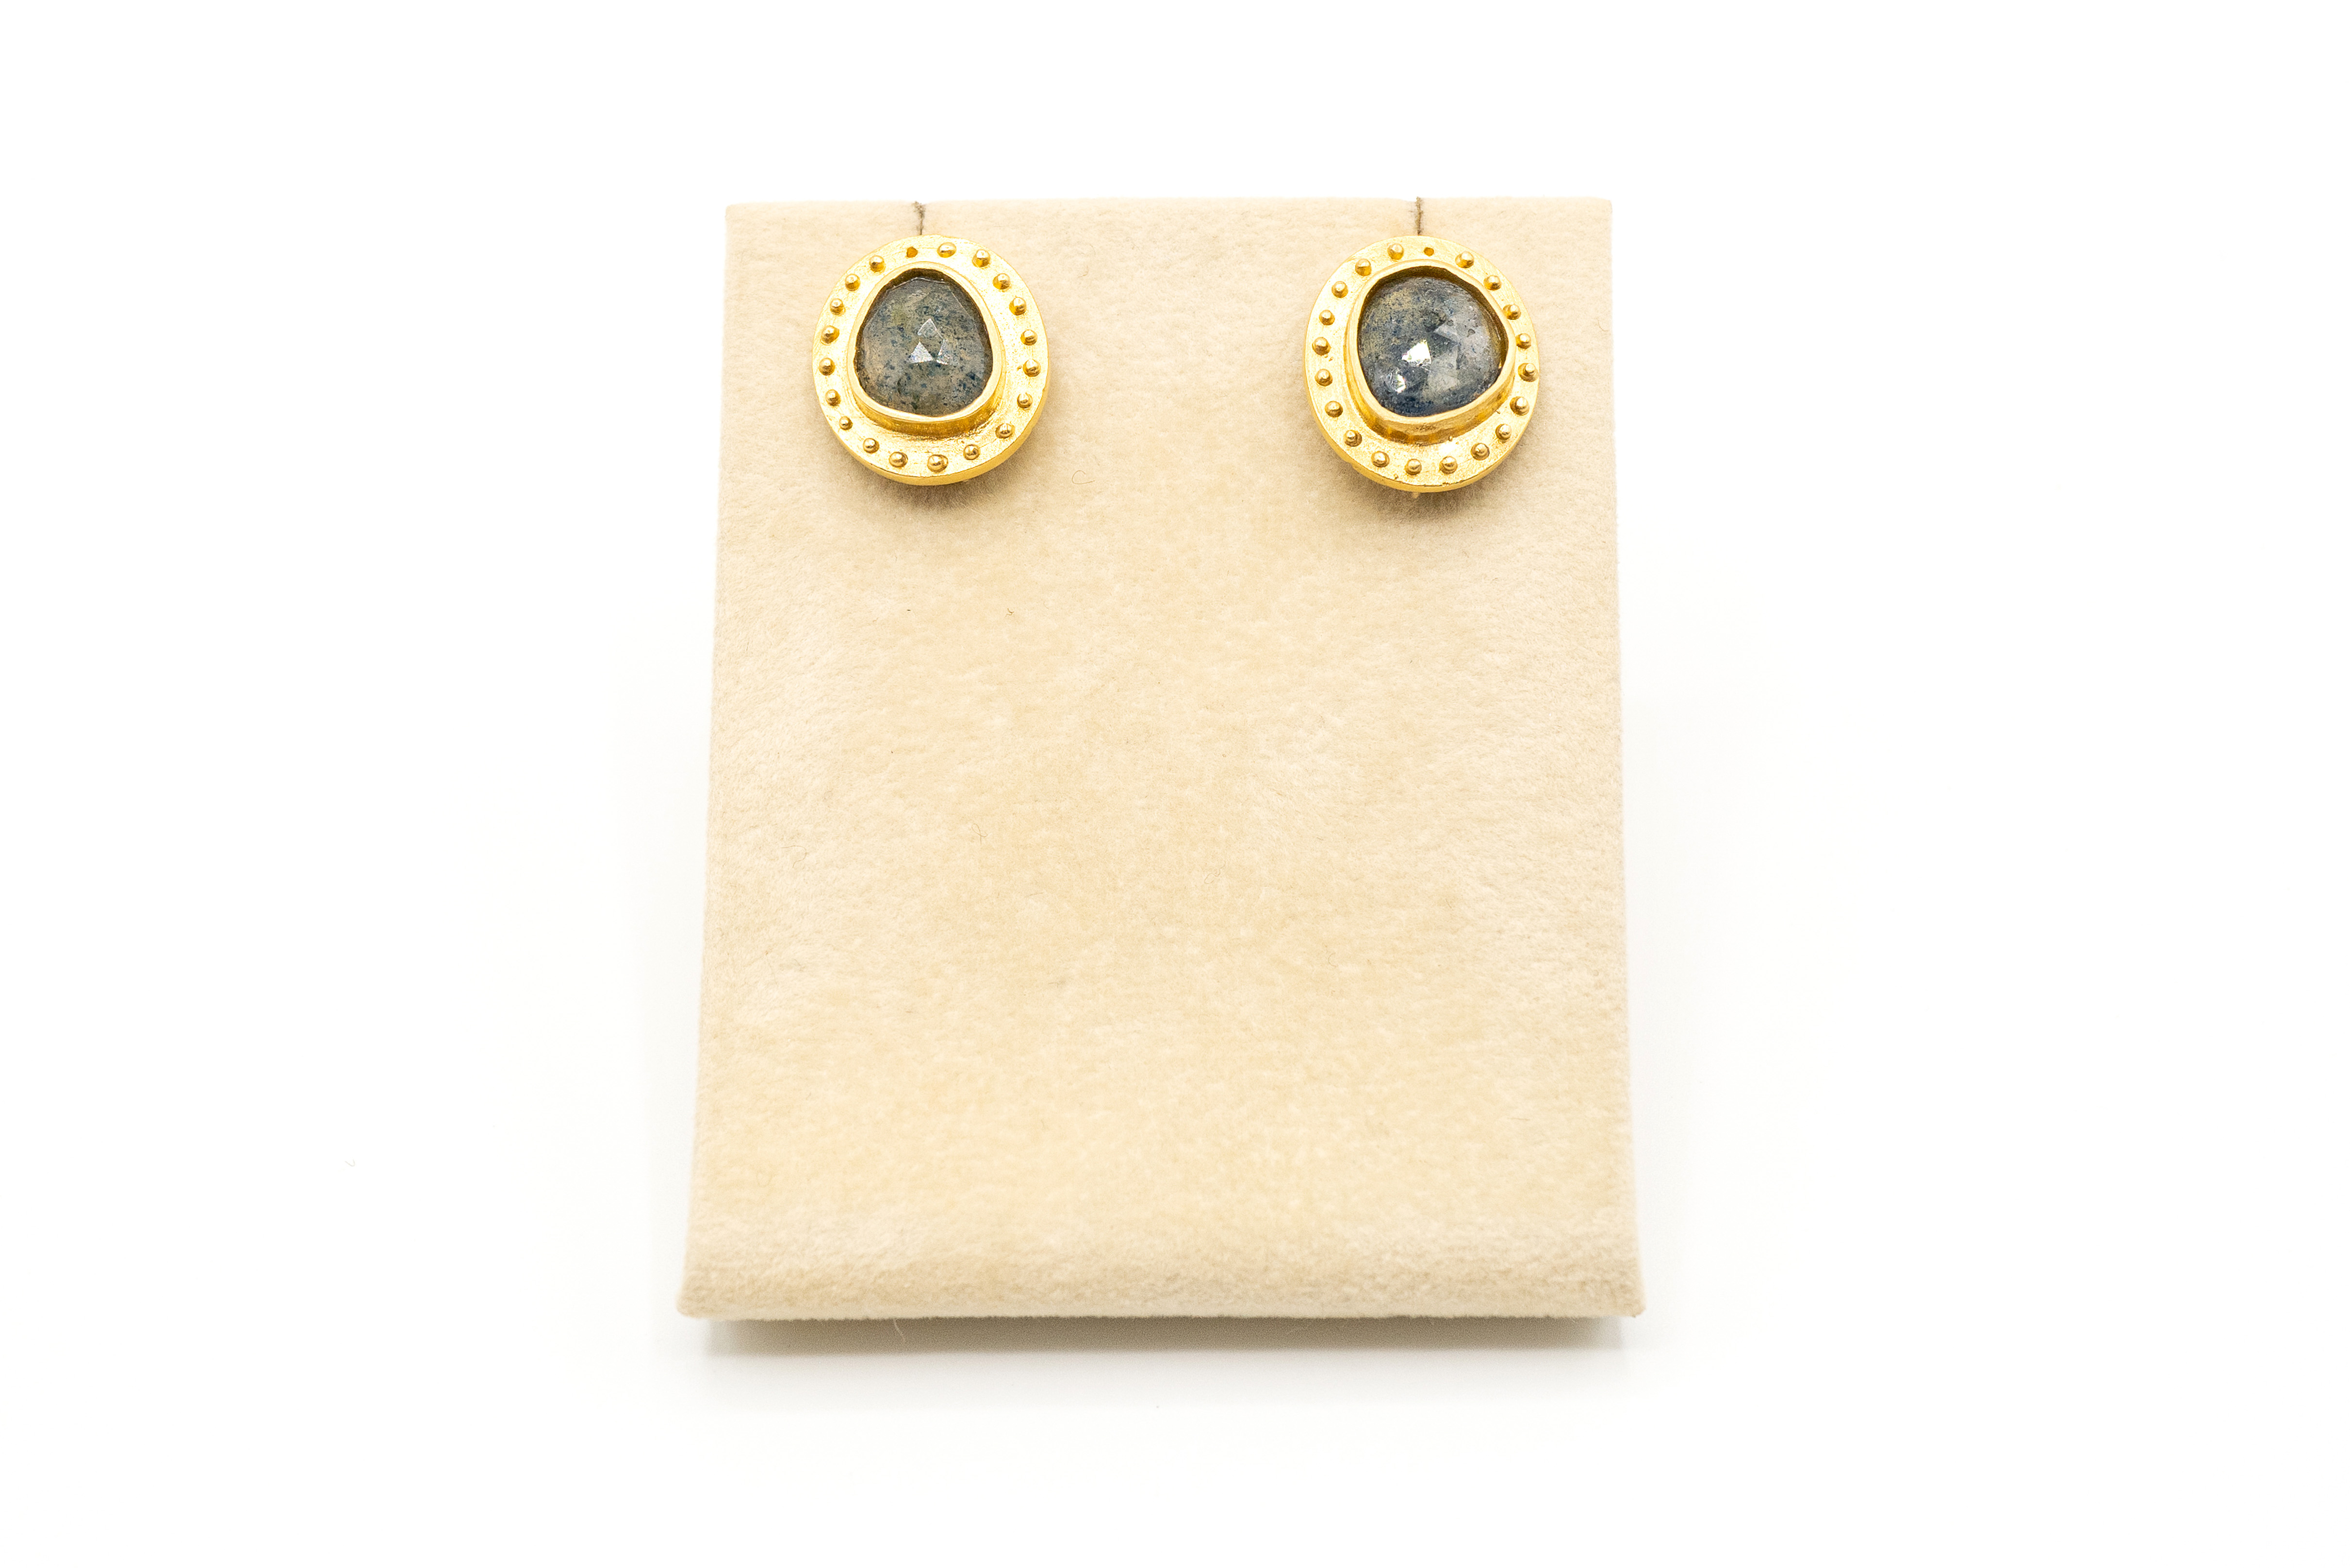 MAB 21-0052 Raw Green Sapphire and 18k Gold Earrings